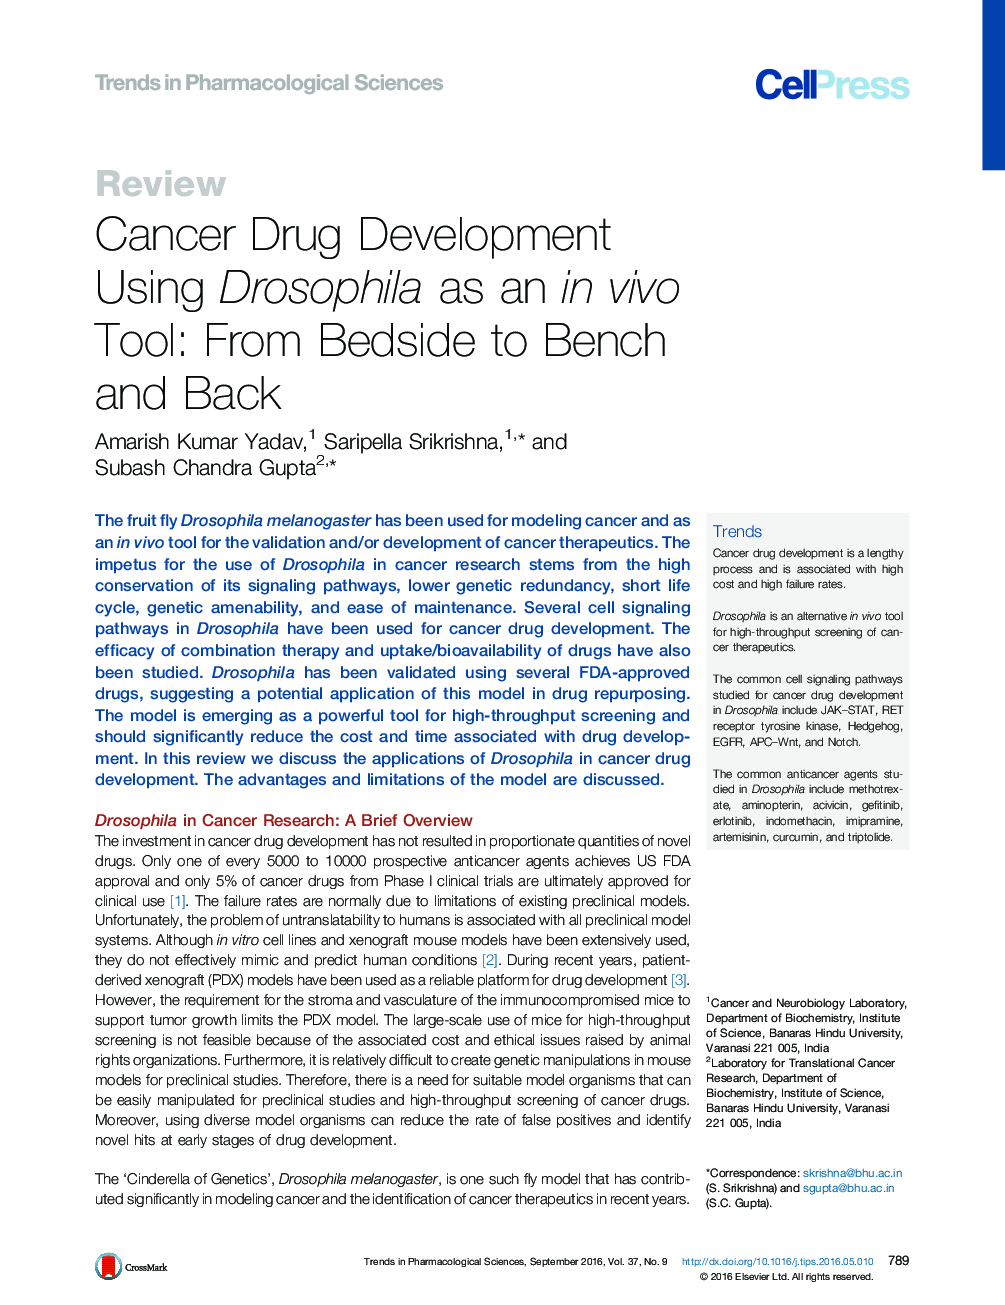 Cancer Drug Development Using Drosophila as an in vivo Tool: From Bedside to Bench and Back